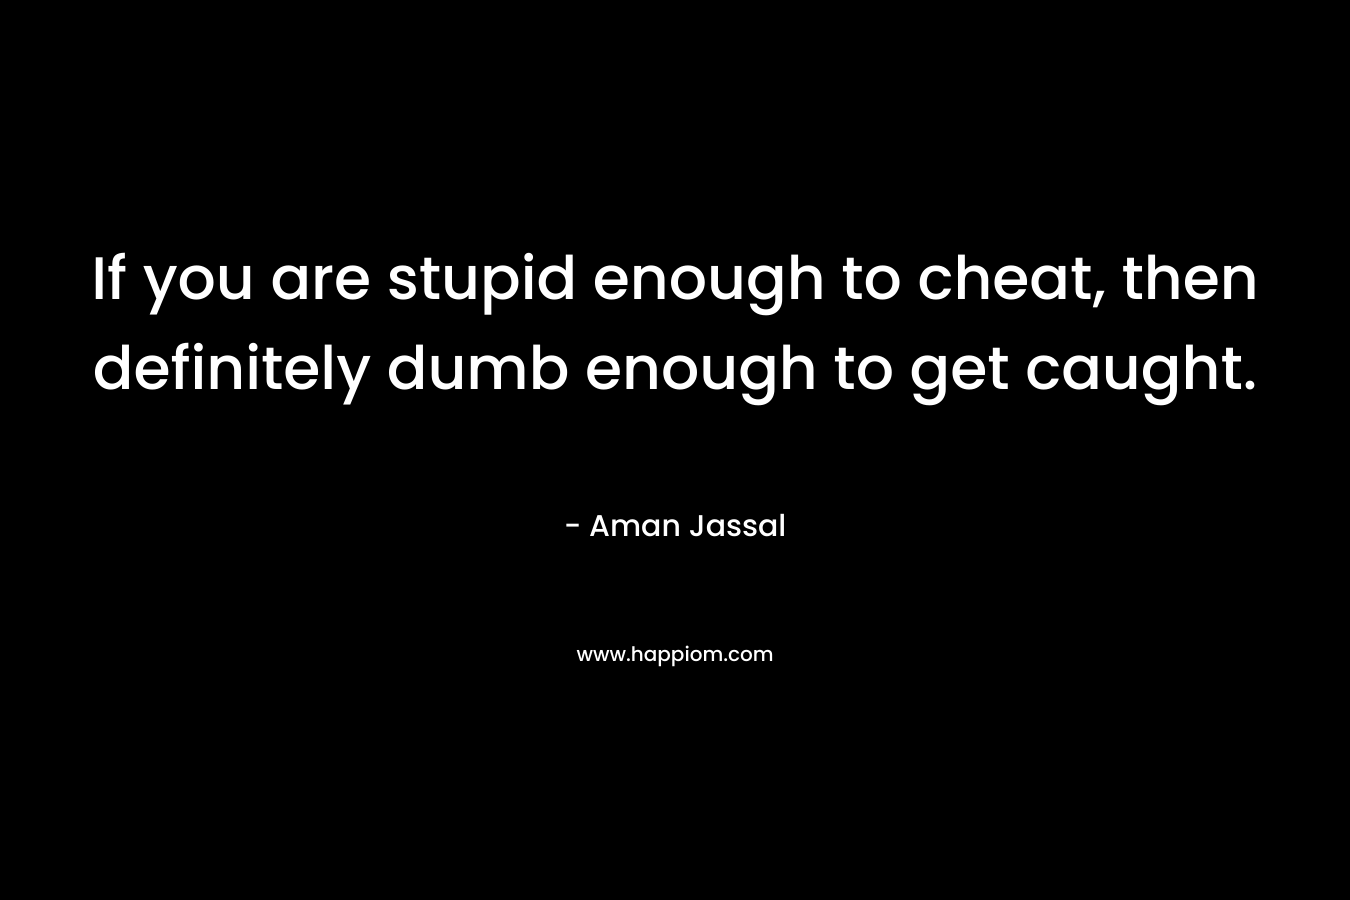 If you are stupid enough to cheat, then definitely dumb enough to get caught. – Aman Jassal